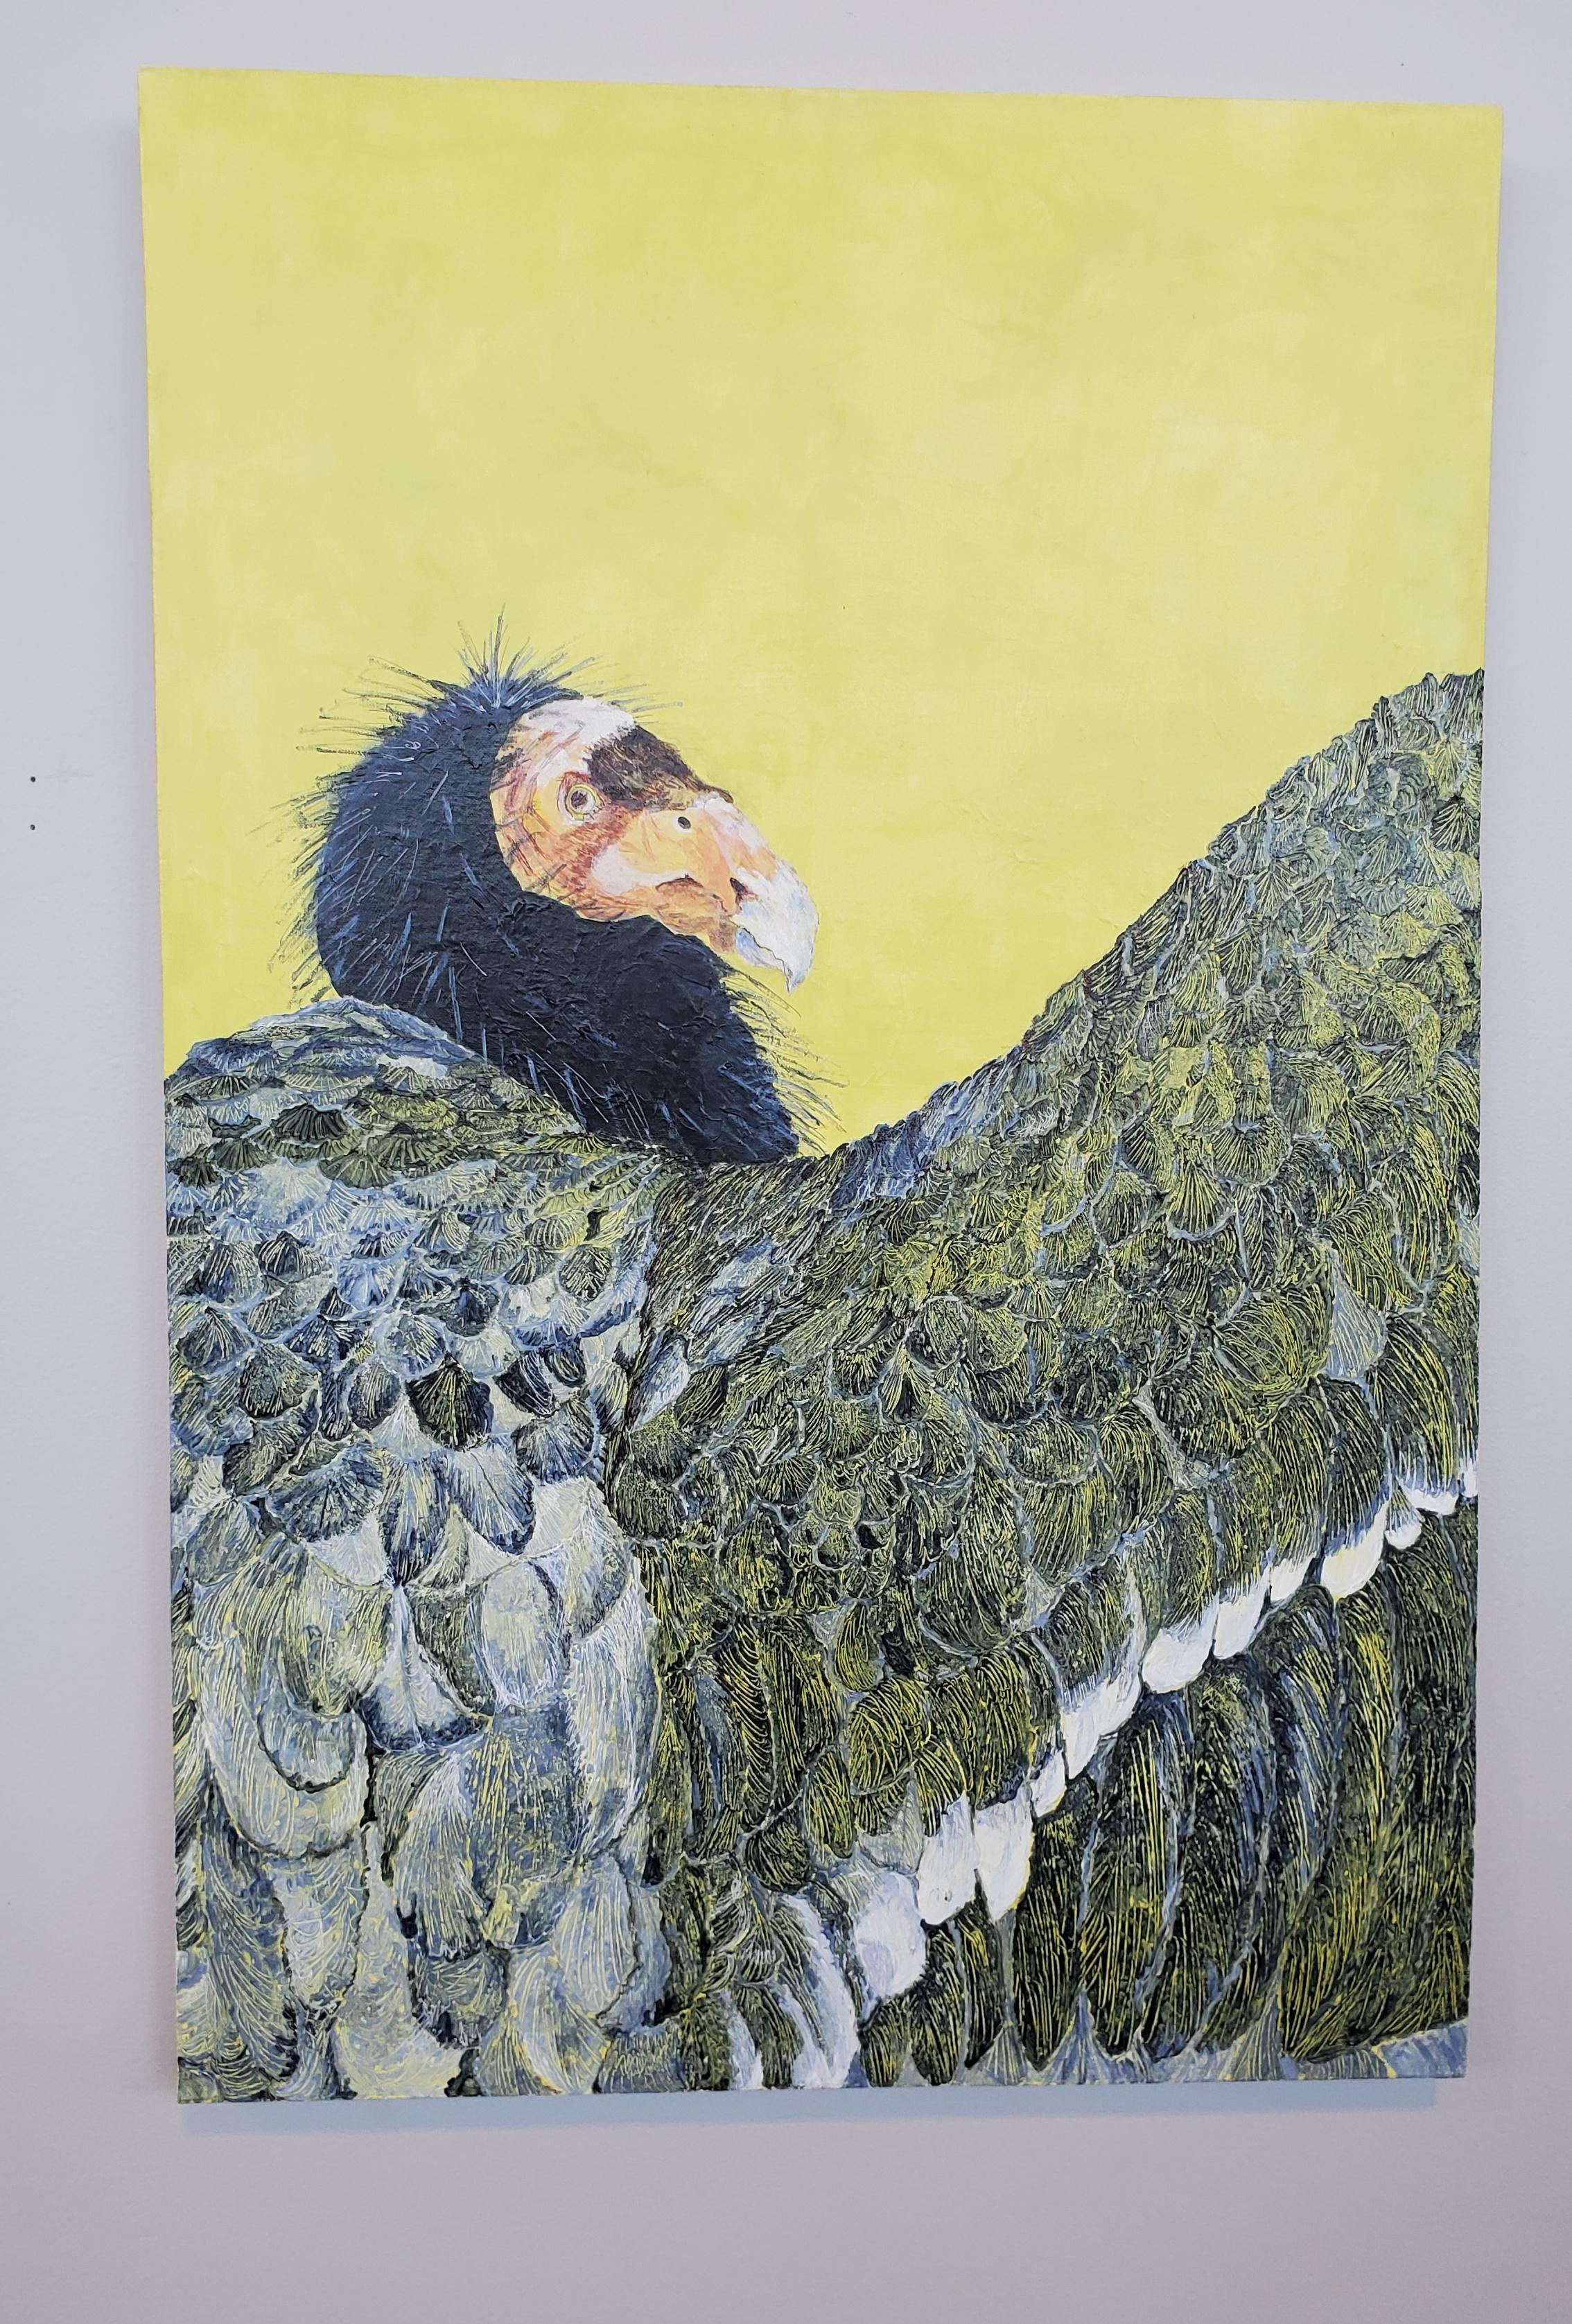 Avian Fables: Condor Rising - acrylic and ink on canvas - Painting by Alison Keenan